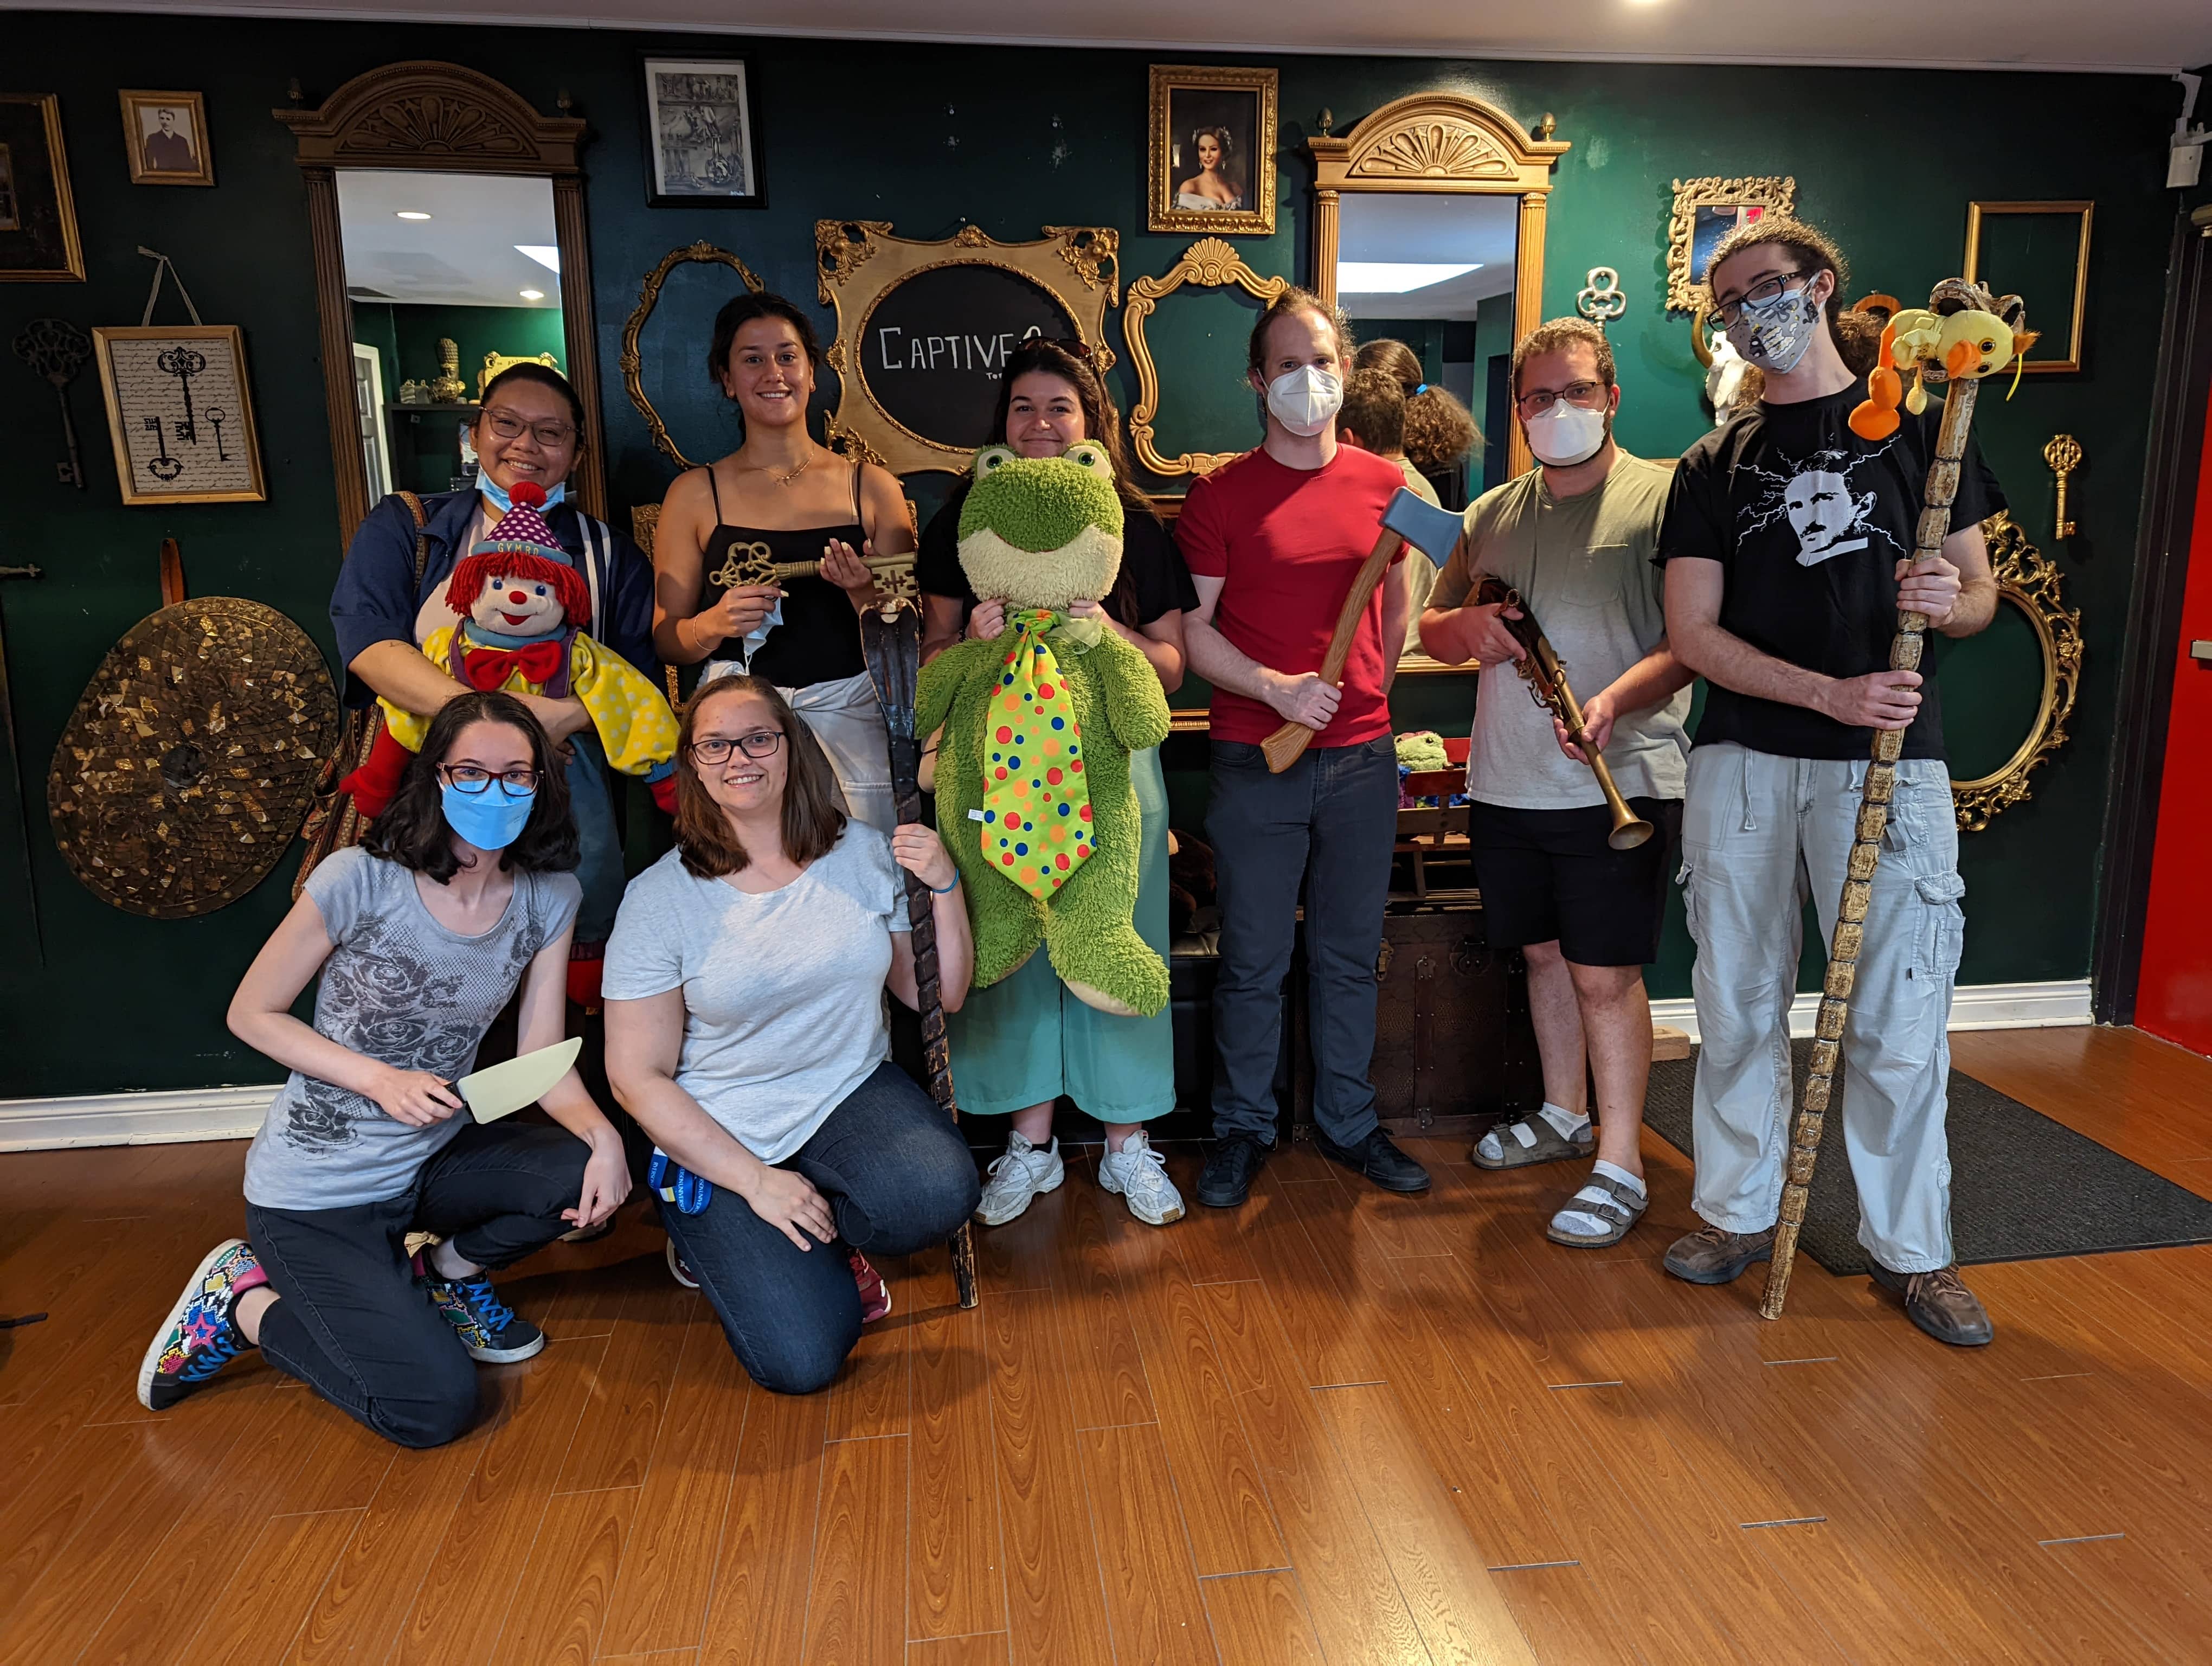 The Foucher Group at The Blind Tiger at Captive Escape Rooms